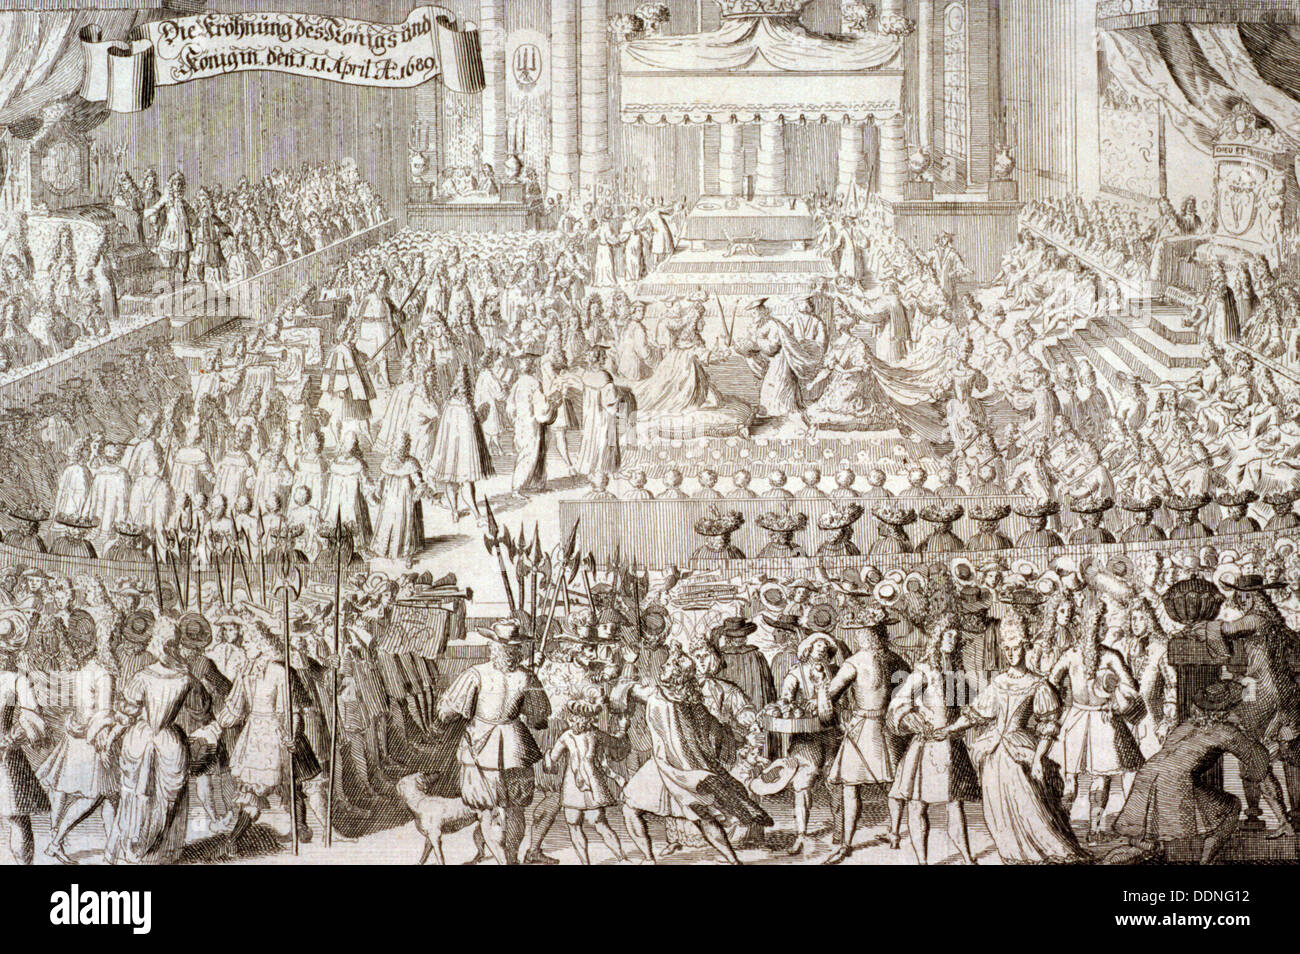 Coronation of William III and Mary II in Westminster Abbey, London, 1689. Artist: Anon Stock Photo